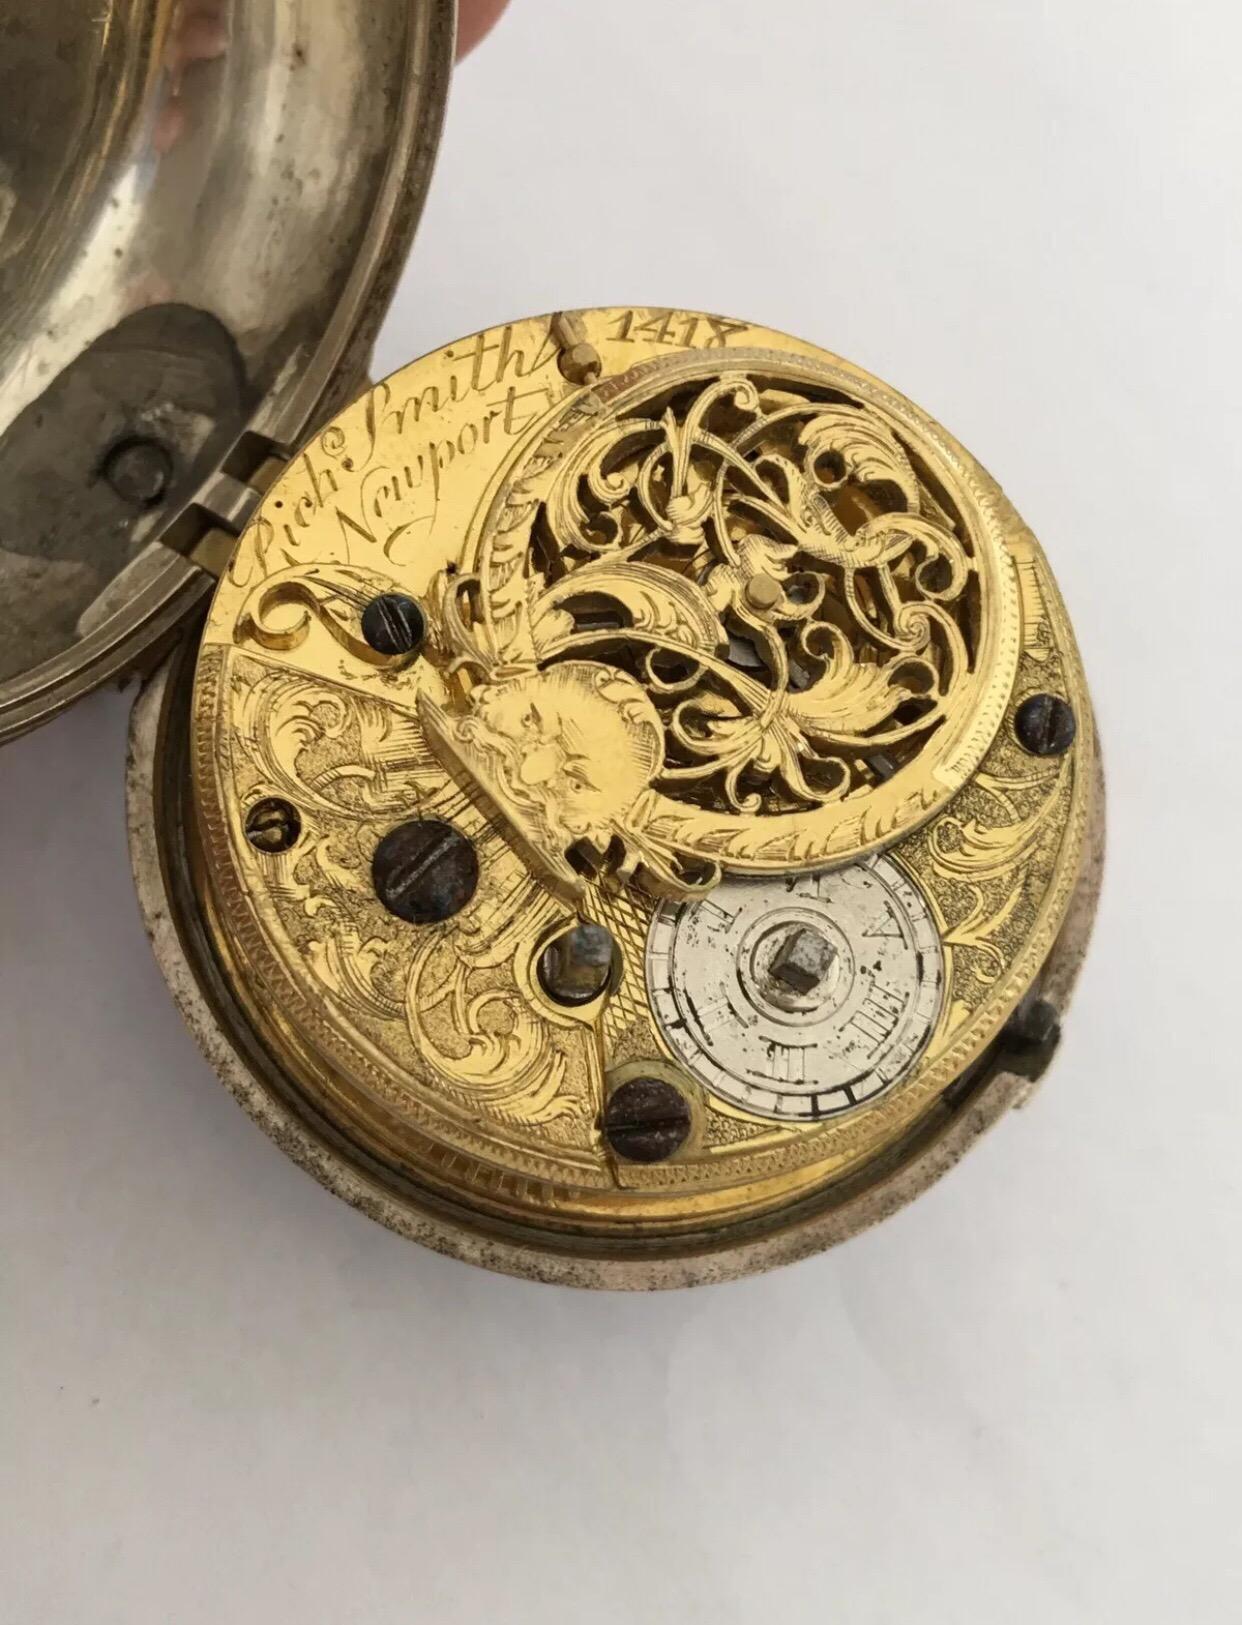 Early Verge English Fusee Pocket Watch Signed Richard Smith, Newport, circa 1730 5